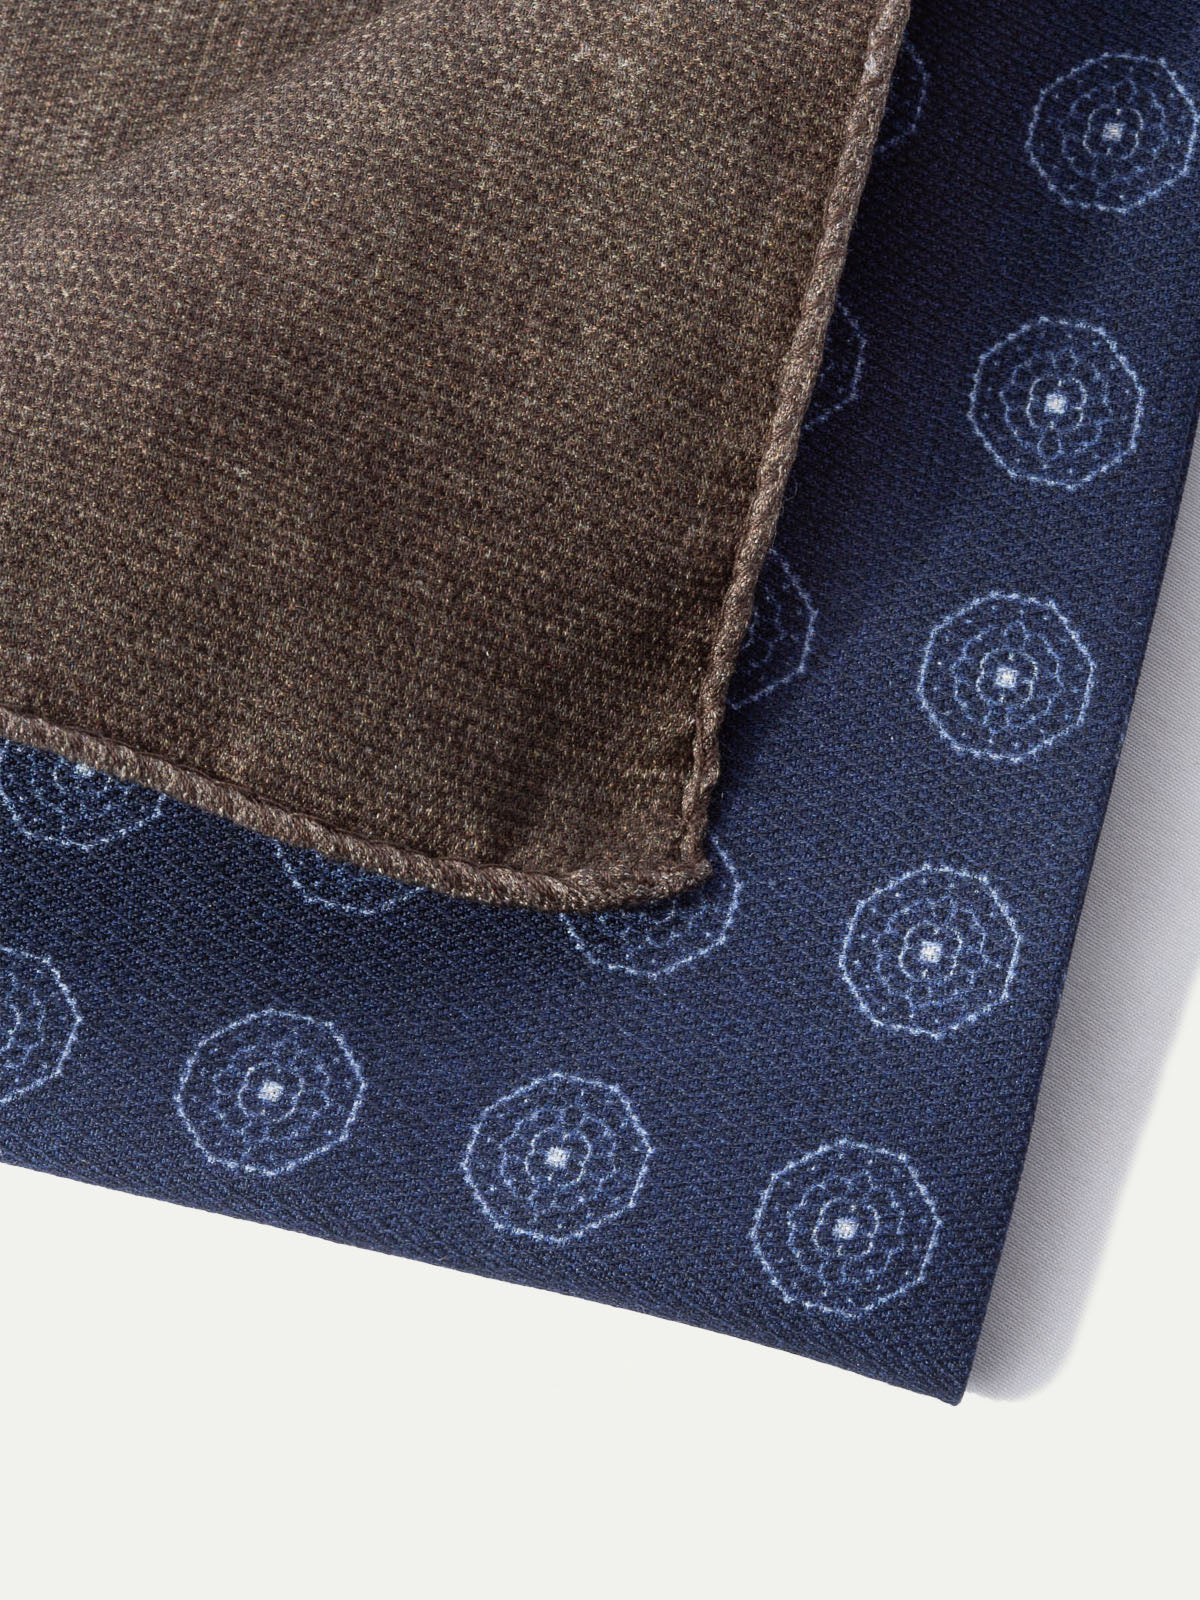 Blue and brown reversible pocket square - Made in Italy